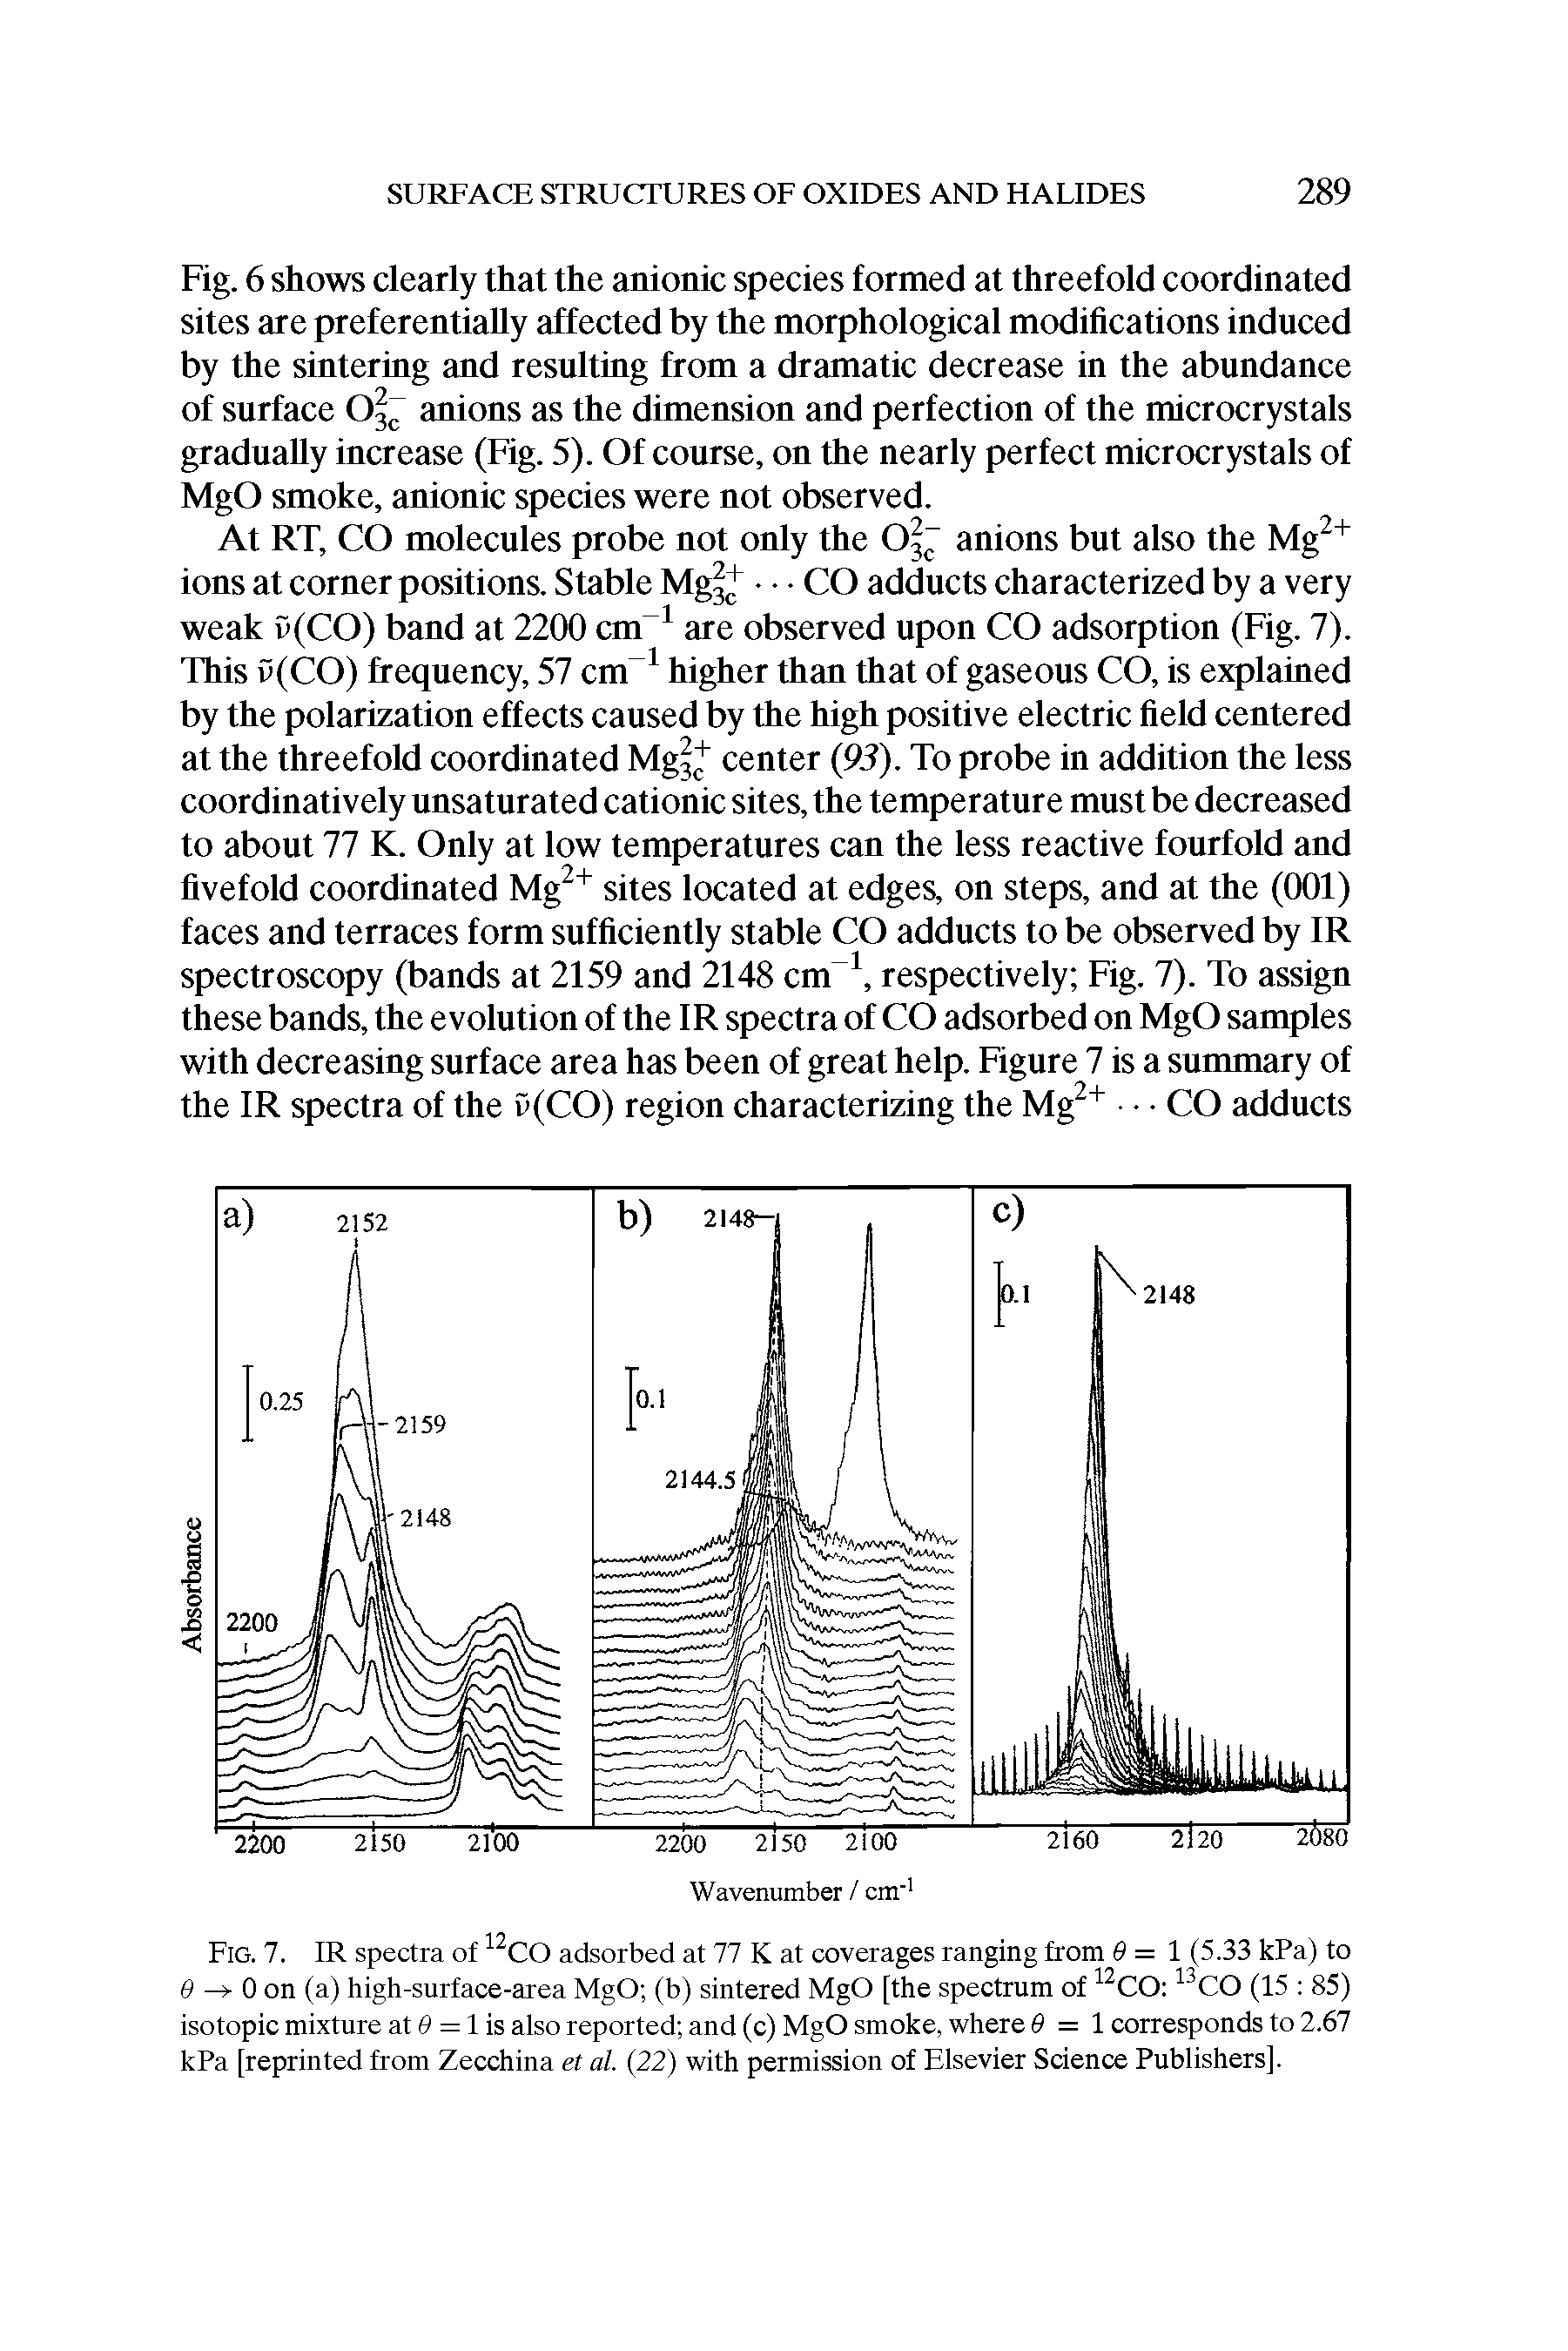 Fig. 6 shows clearly that the anionic species formed at threefold coordinated sites are preferentially affected by the morphological modifications induced by the sintering and resulting from a dramatic decrease in the abundance of surface O T anions as the dimension and perfection of the microcrystals gradually increase (Fig. 5). Of course, on the nearly perfect microcrystals of MgO smoke, anionic species were not observed.